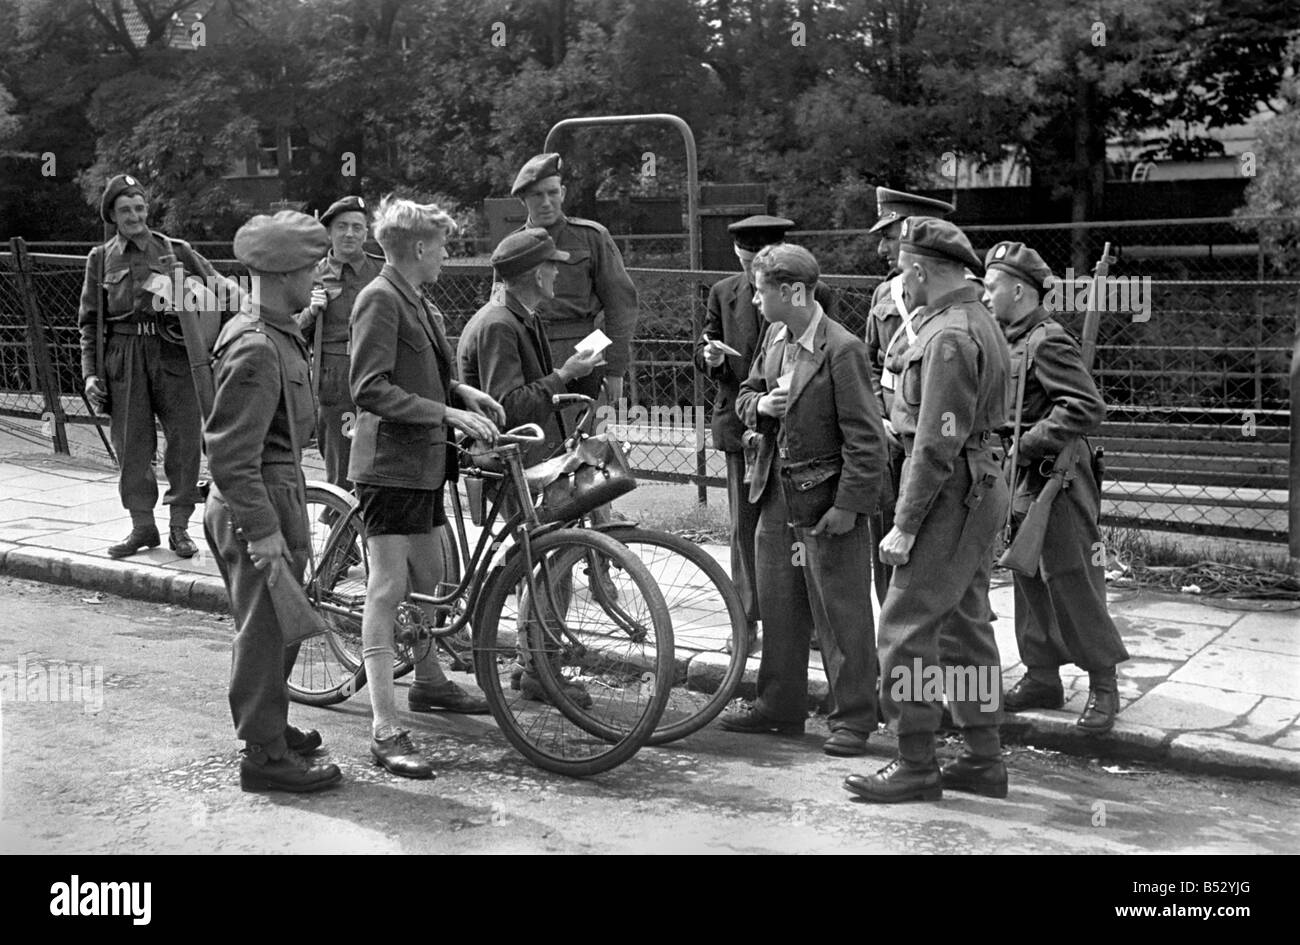 Scenes showing children talking to occupying soldiers in Berlin as the British Army occupied the city at the end of the Second World War.;July 1945 ;OL501A-005 Stock Photo